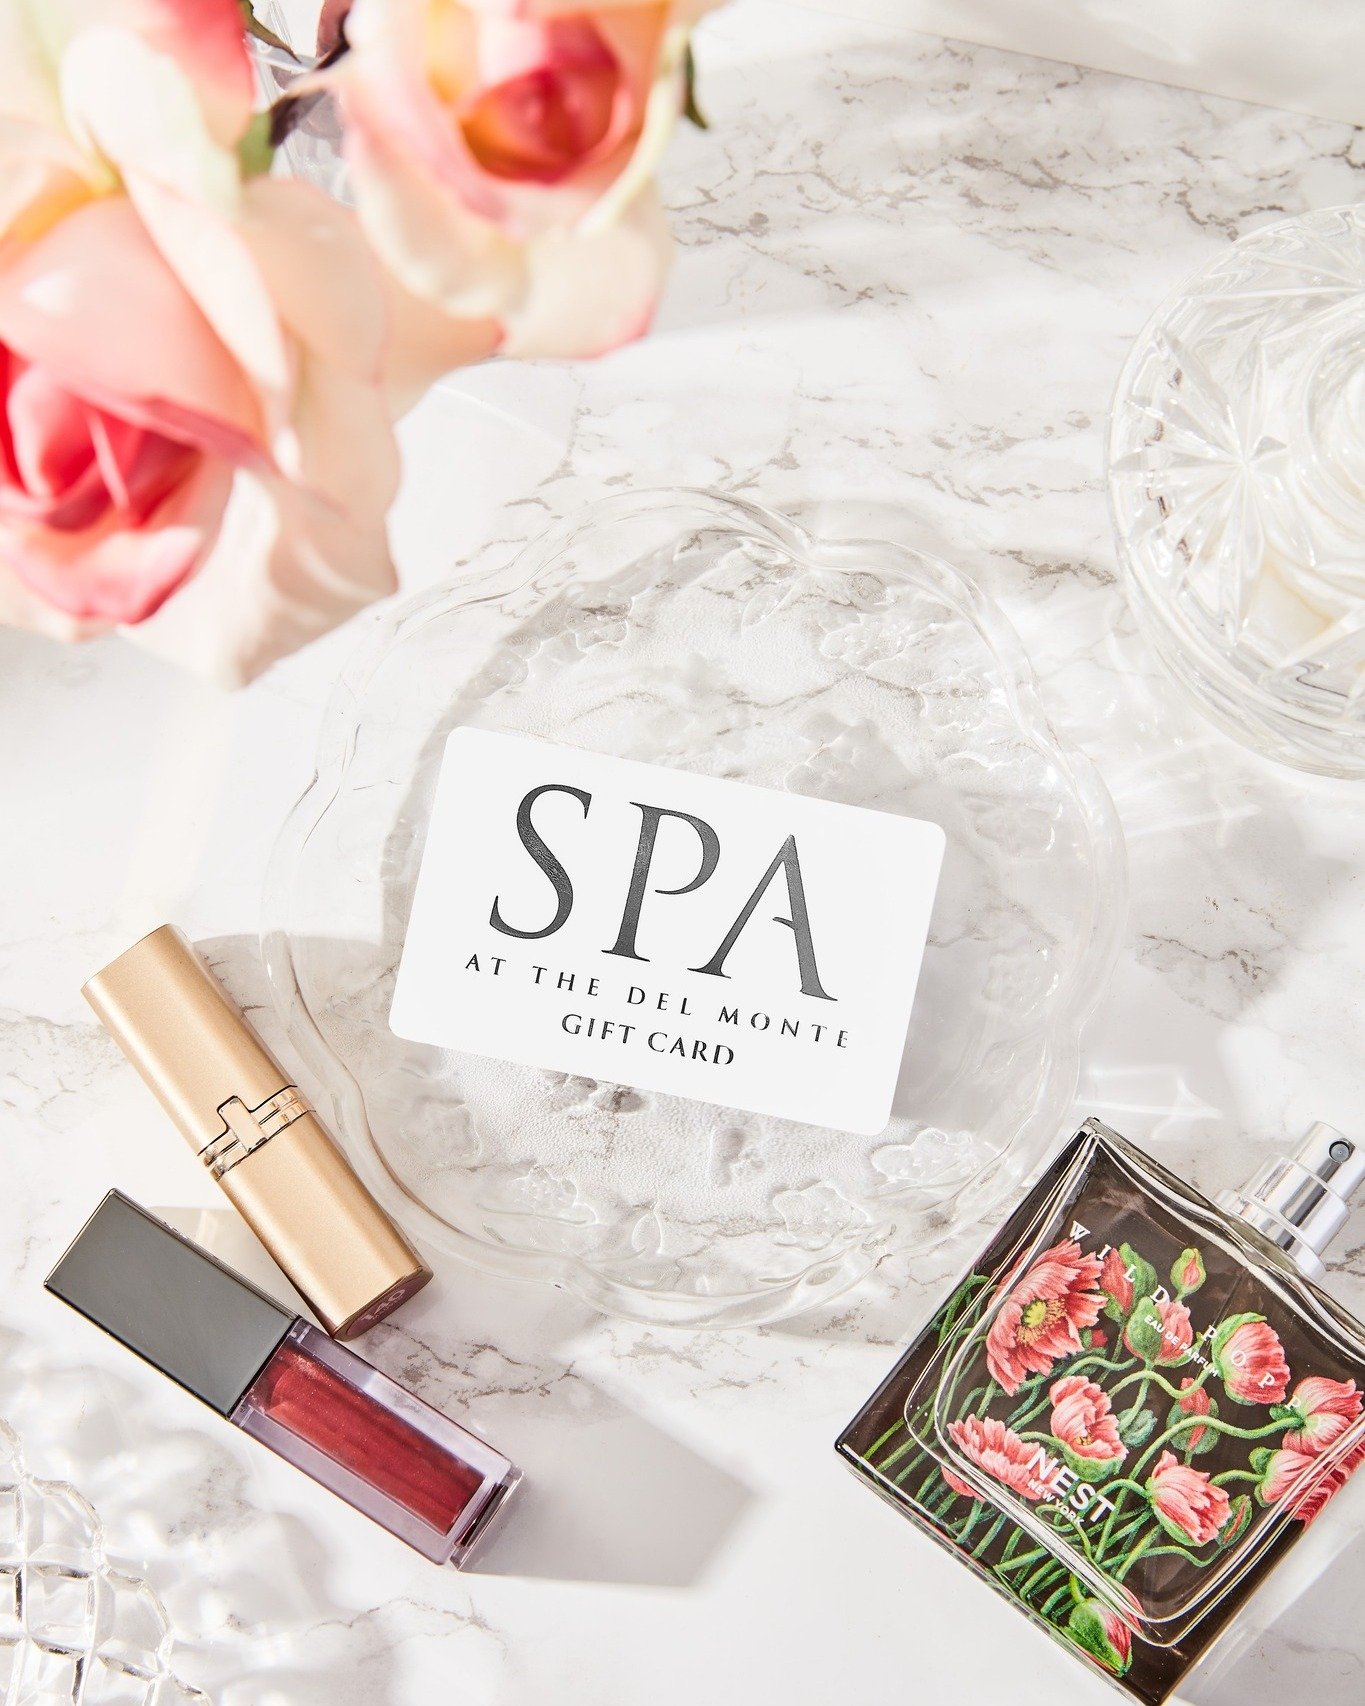 If Mom's were flowers, we'd pick YOU 🥰
.
.
.
Make her feel luxurious this Mother's Day with a Spa at the Del Monte gift card today 💌
.
#delmontespa #skinhealth #spalife #spalife #spa #dayspa #pittsford #skincare #shoplocal #treatyourself #pittsford